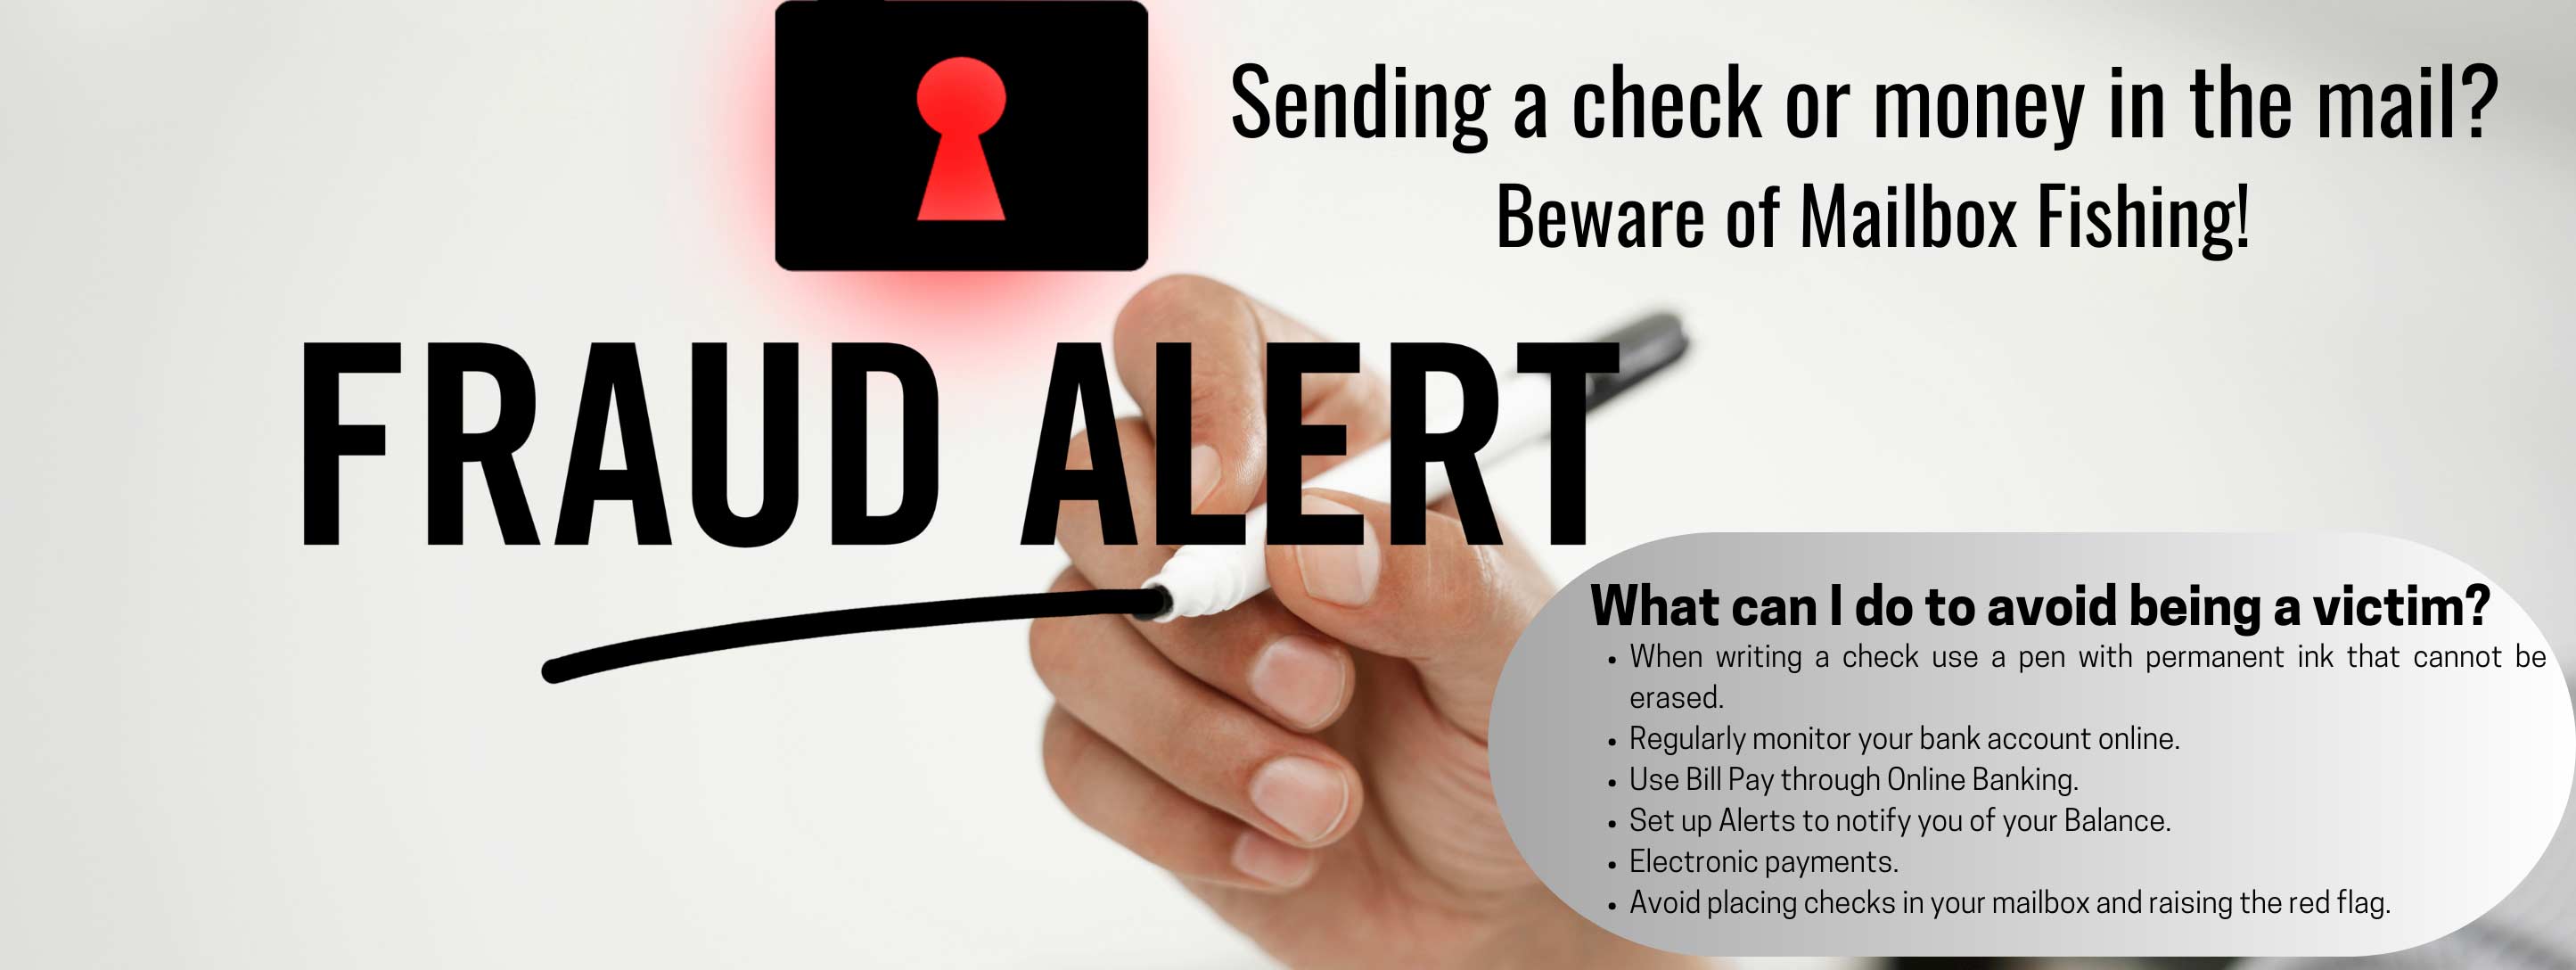 Fraud Alert Sending a check or money in the mail? Beware of Mailbox Fishing! What can I do to avoid being a victim? When writing a check use a pen with permanent ink that cannot be erased. Regularly monitor your bank account online. Use Bull Pay through Online Banking. Set up alerts to notify you of your balance. Electronic payments. Avoid placing check in your mailbox and raising the red flag.